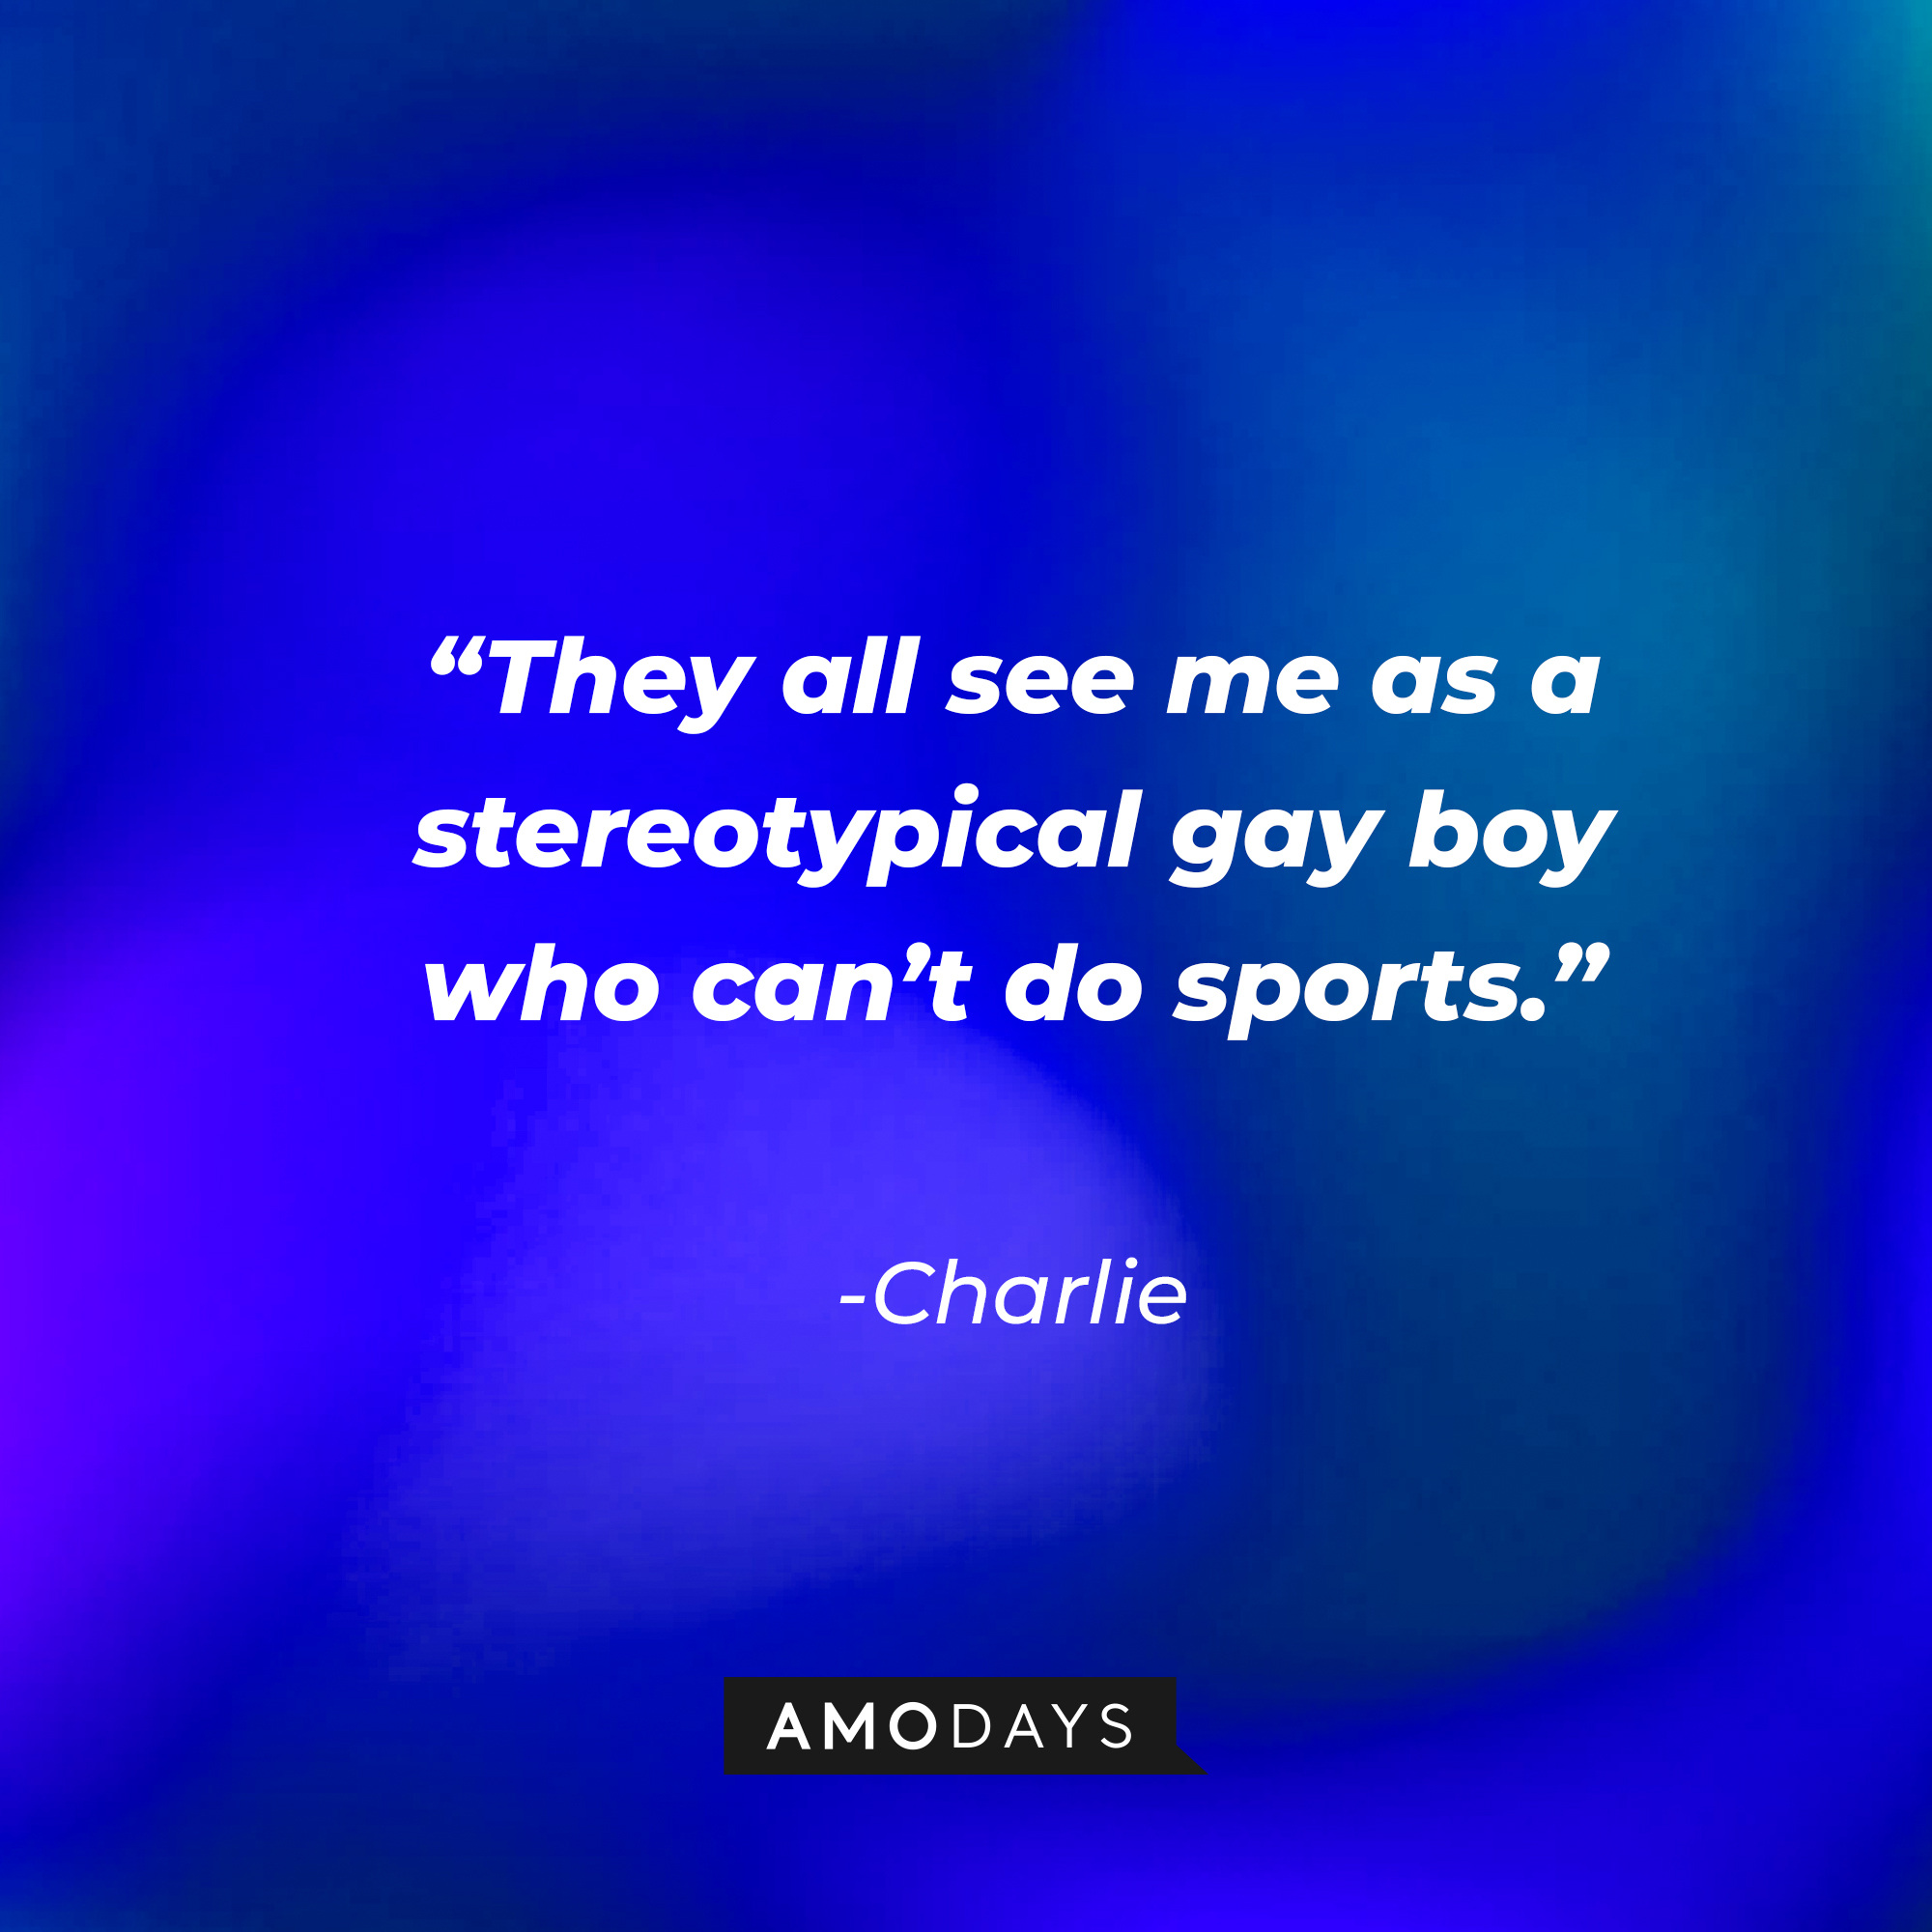 Charlie’s quote: “They all see me as a stereotypical gay boy who can’t do sports.” | Source: AmoDays